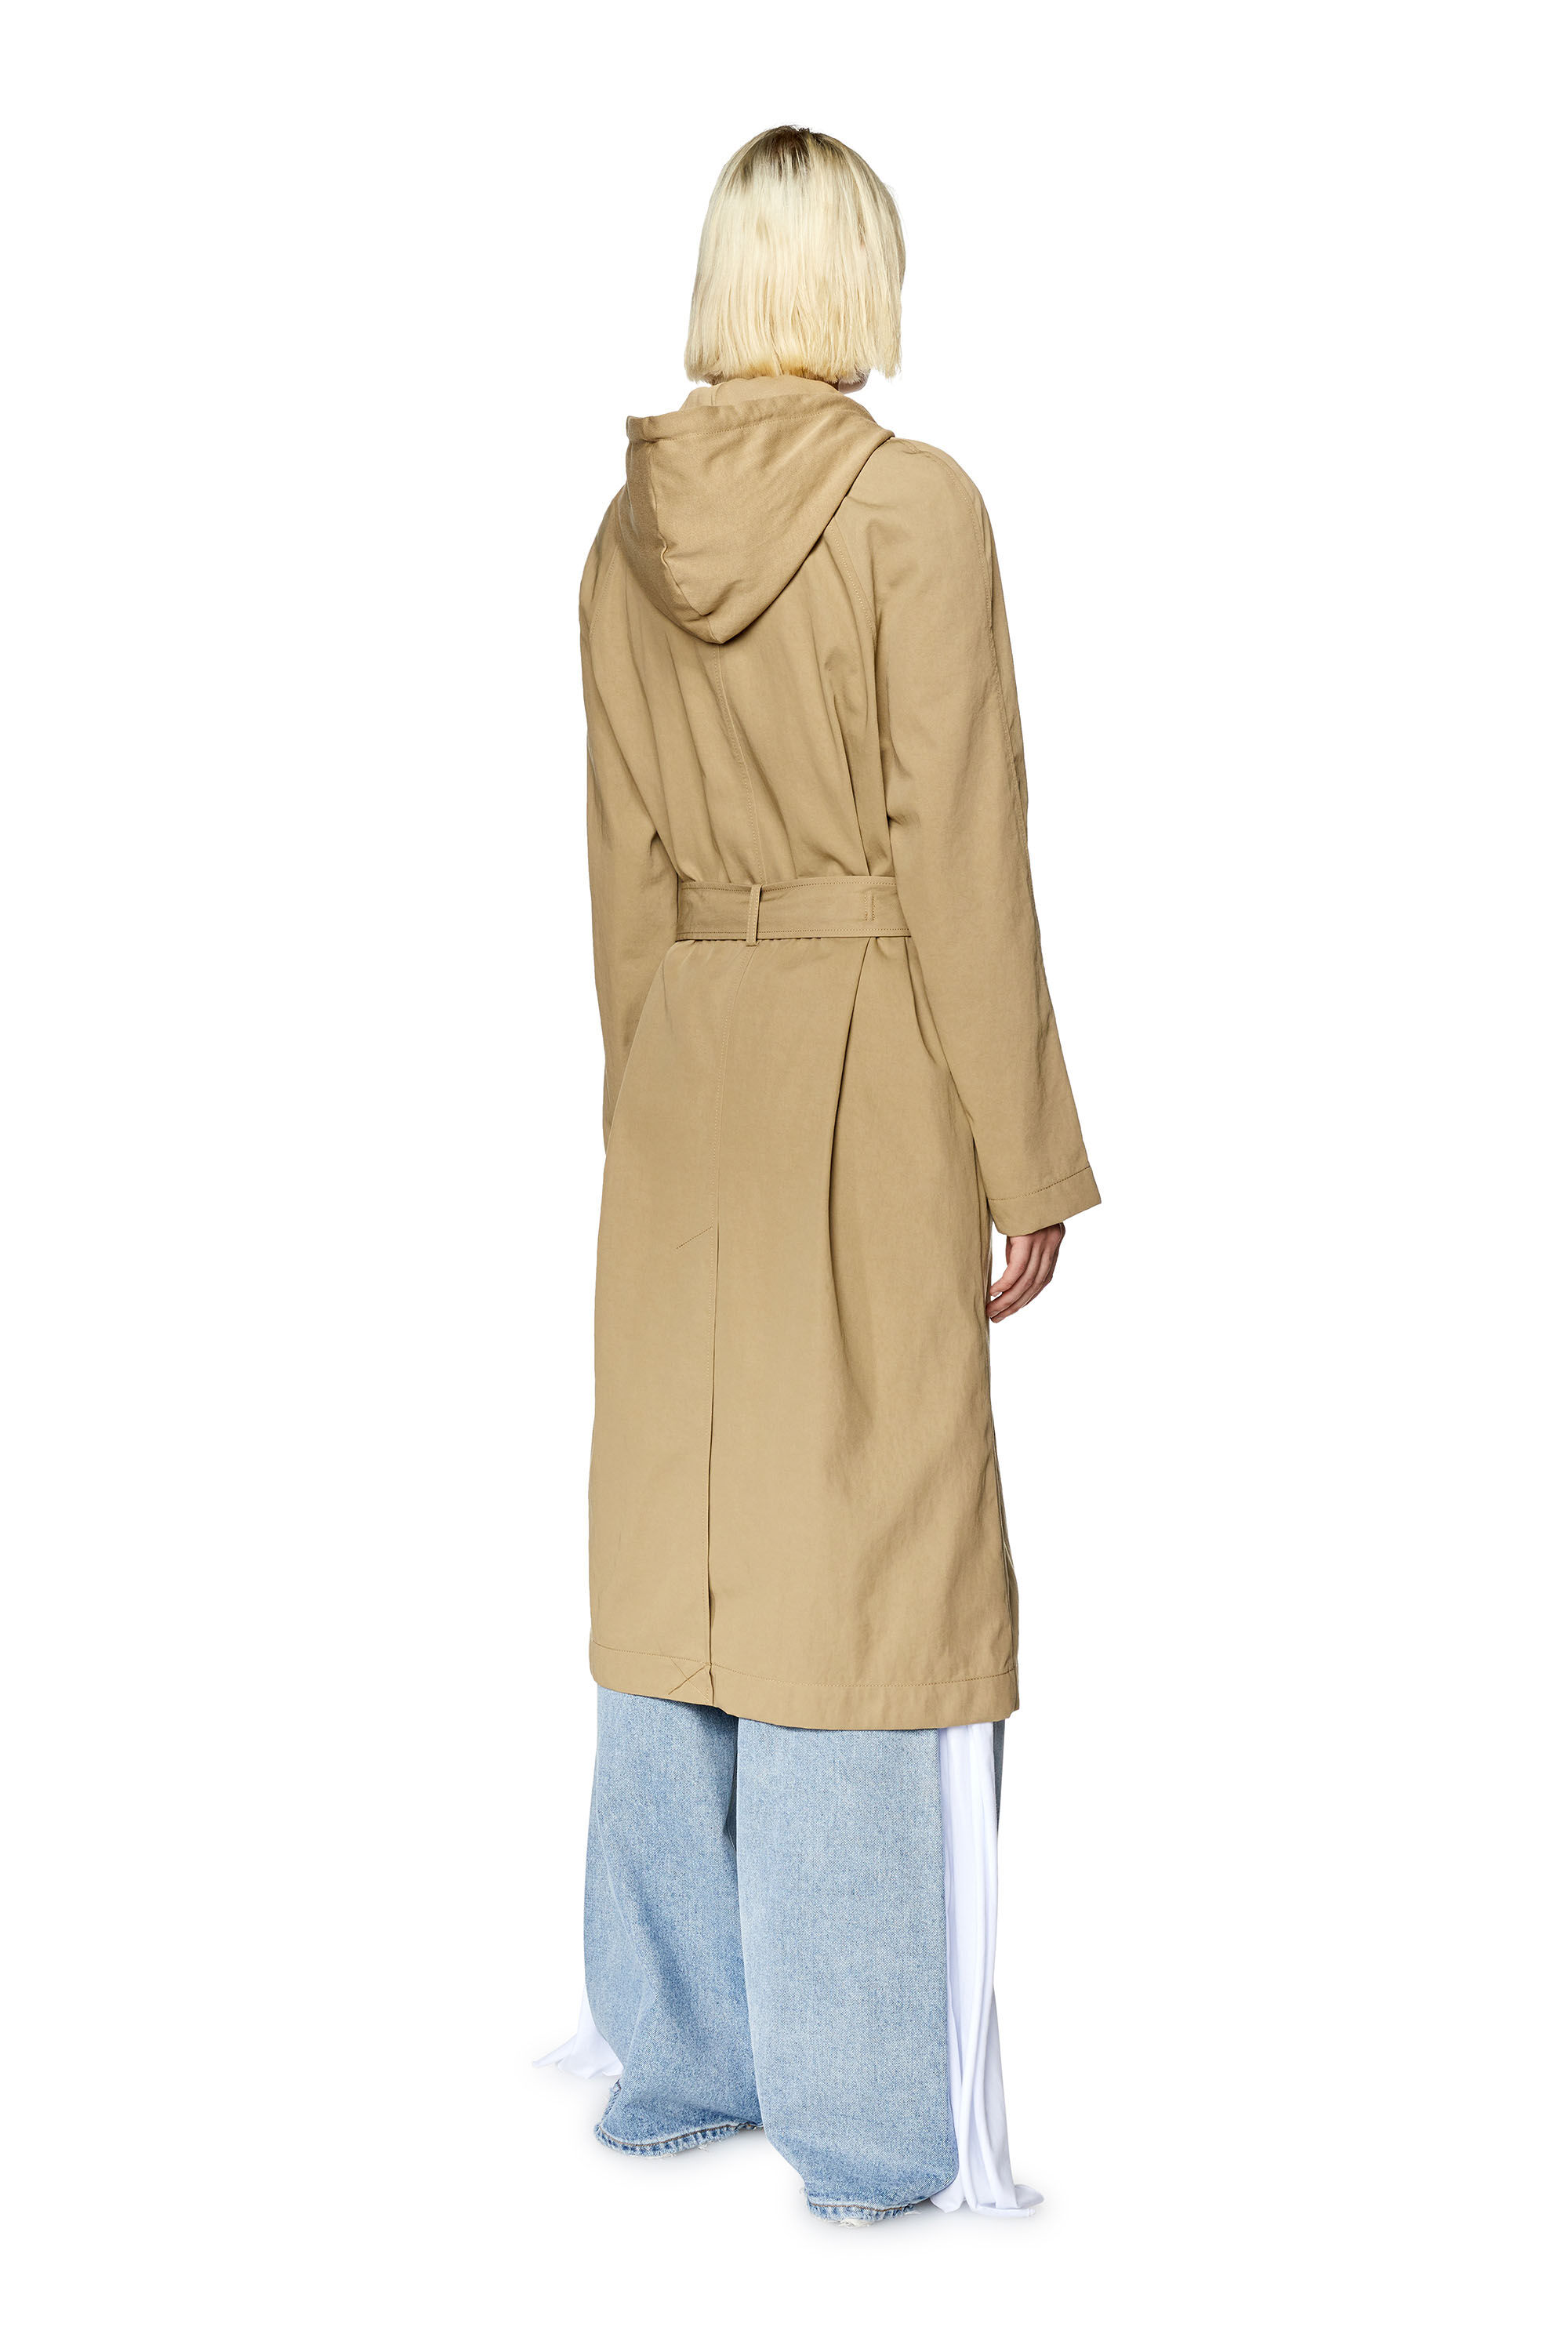 Women's Hybrid trench coat in technical fabric